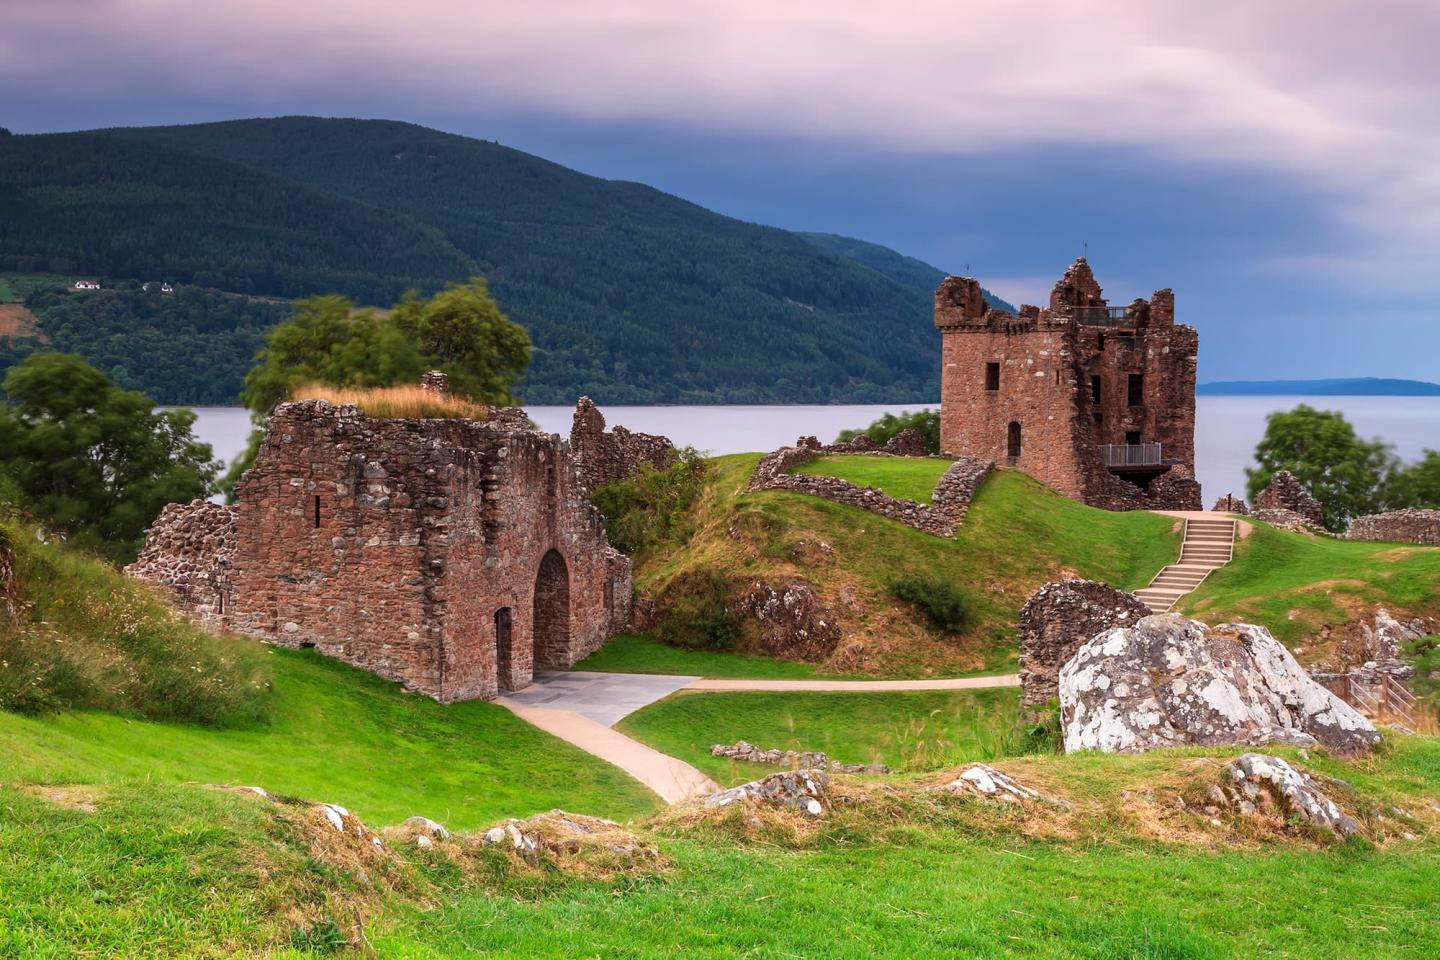 The Ruins of Urqurhart Castle At Loch Ness